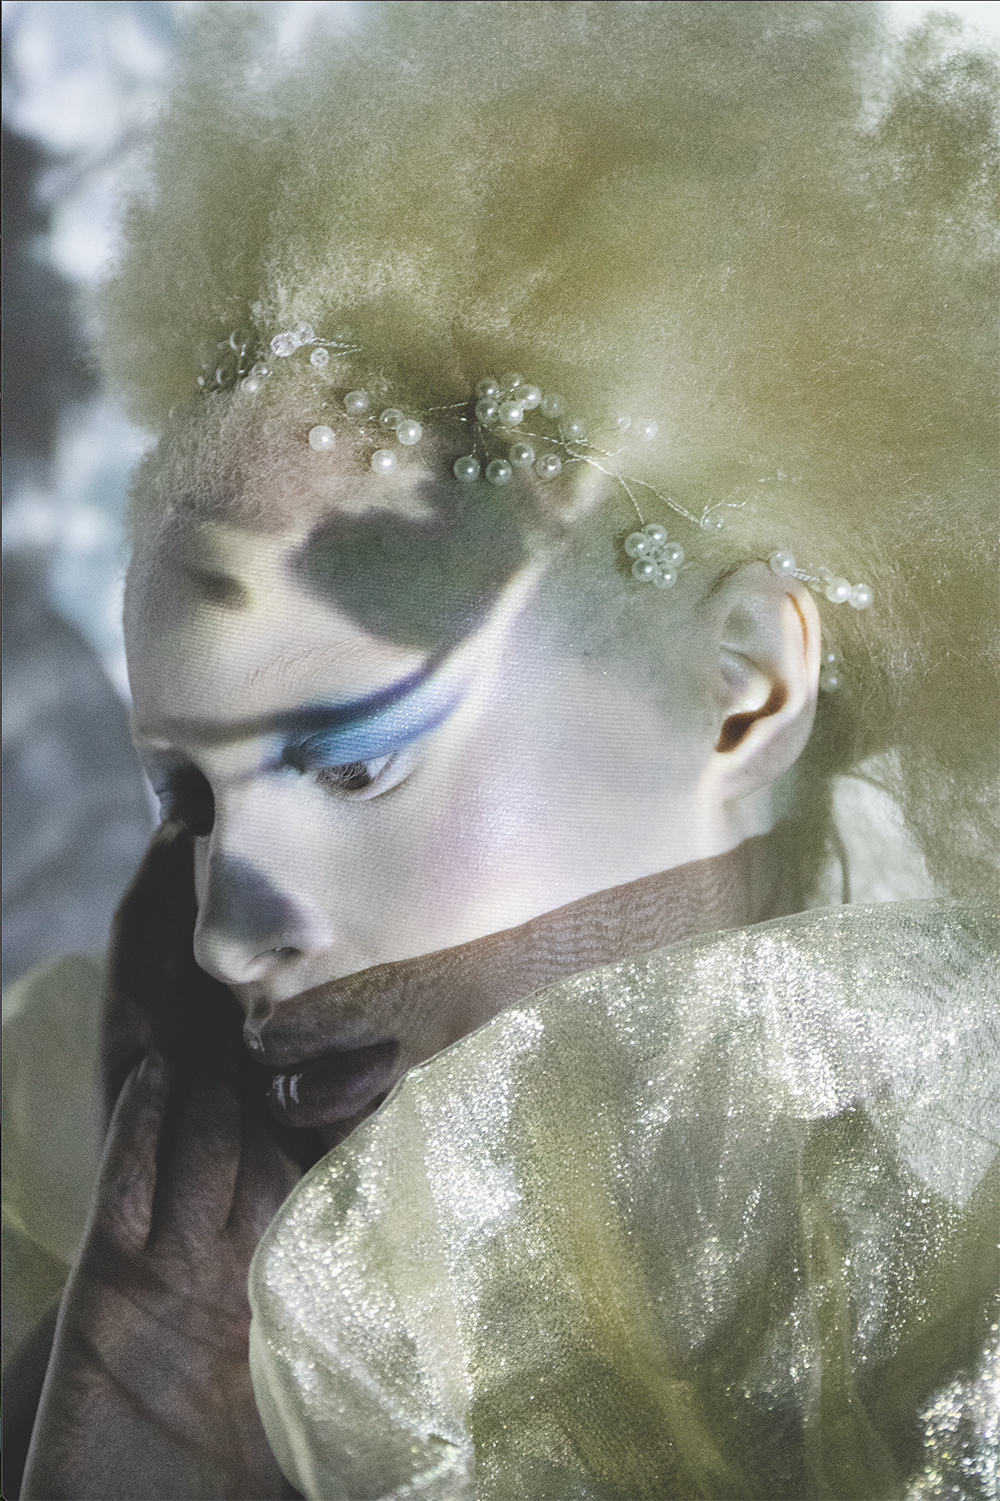 Image shows model with white wig, pearls and dramatic make-up 